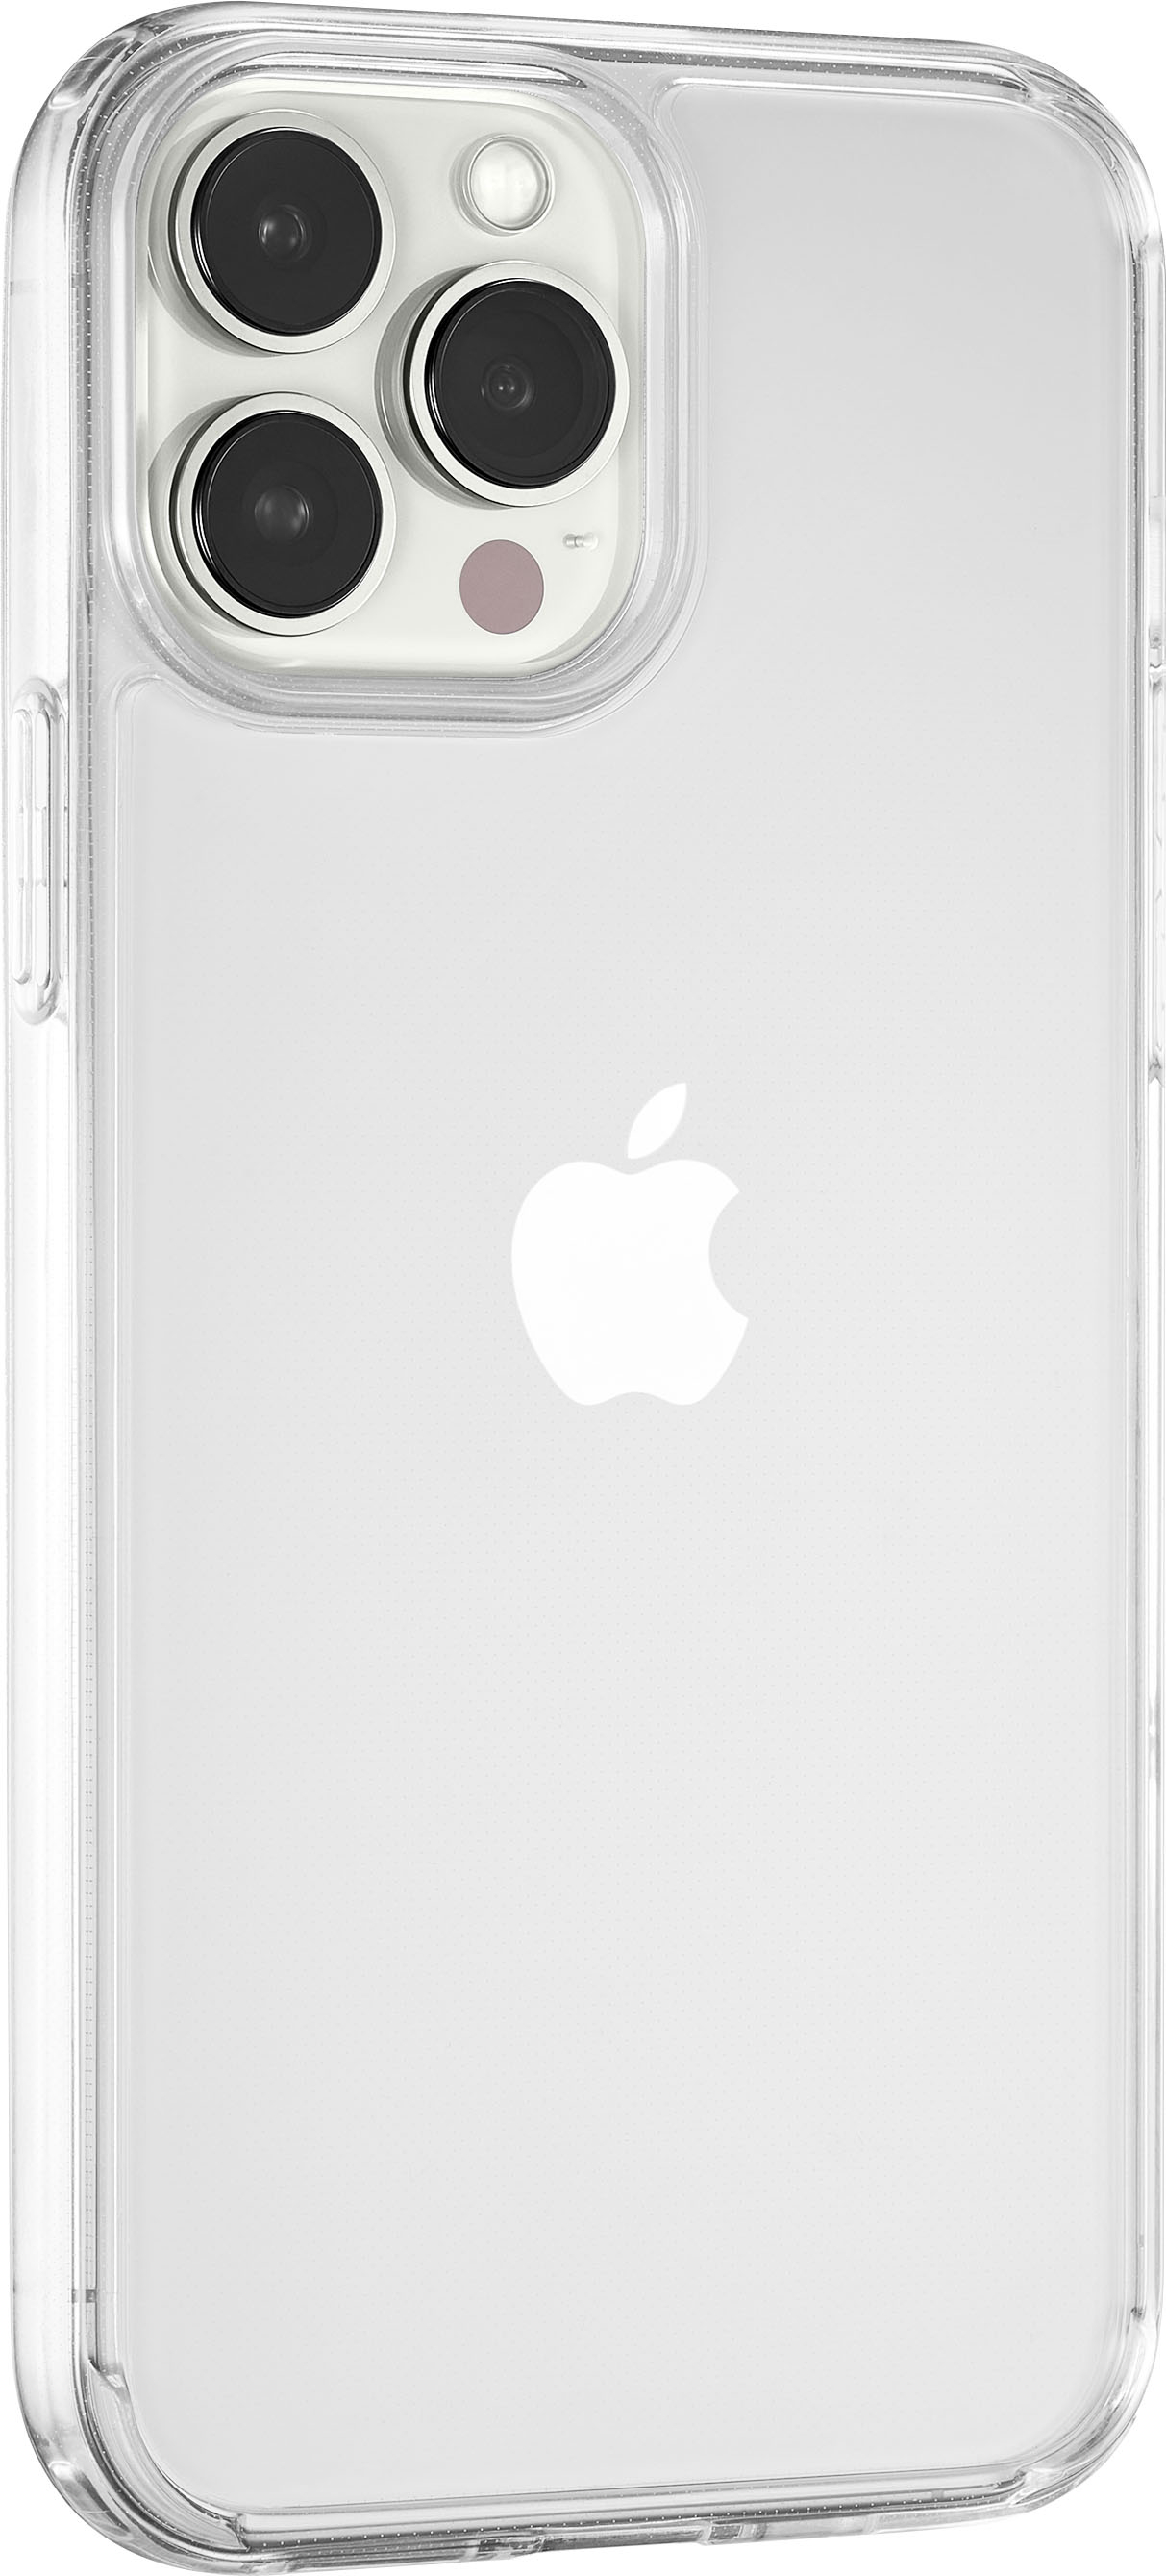 Insignia™ Hard Shell Case for iPhone 13 Pro Max and iPhone 12 Pro